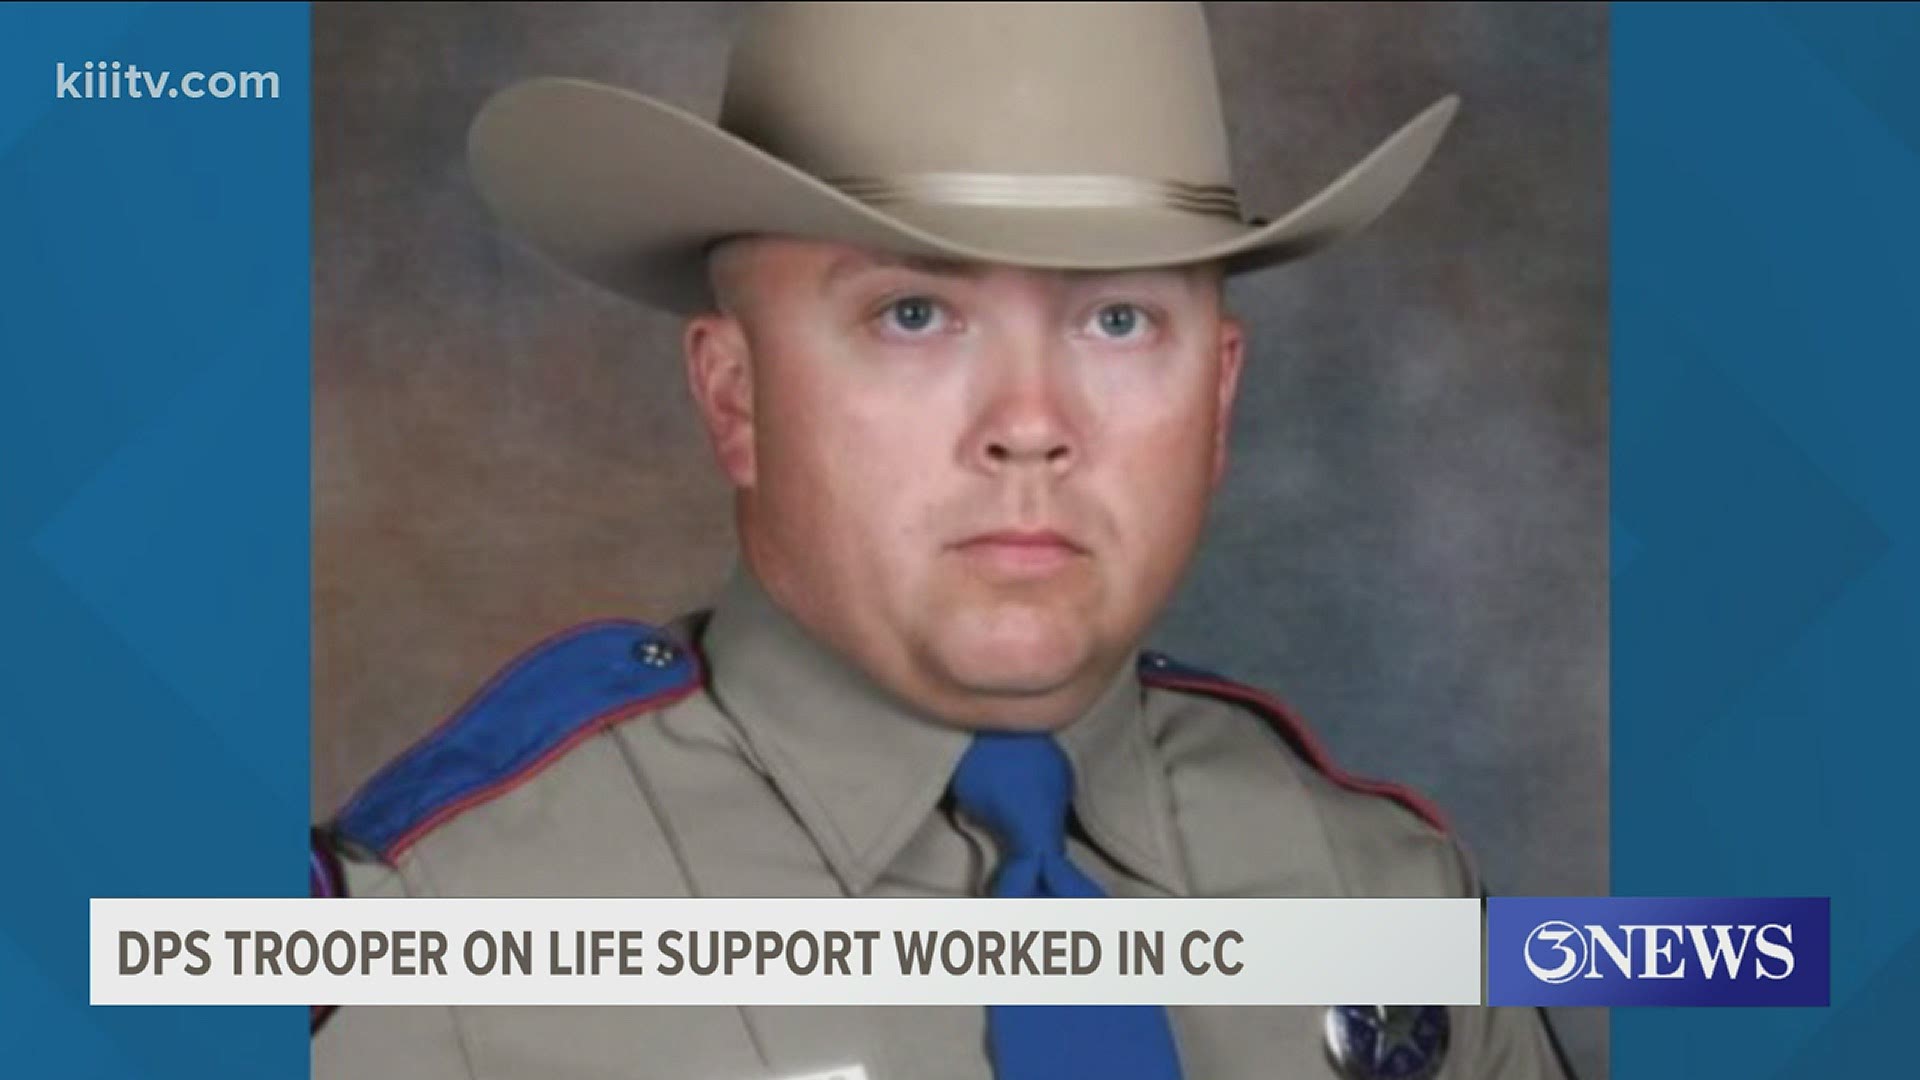 As of Monday, Trooper Chad Walker is on life support in Waco after no longer showing displays of viable brain activity.